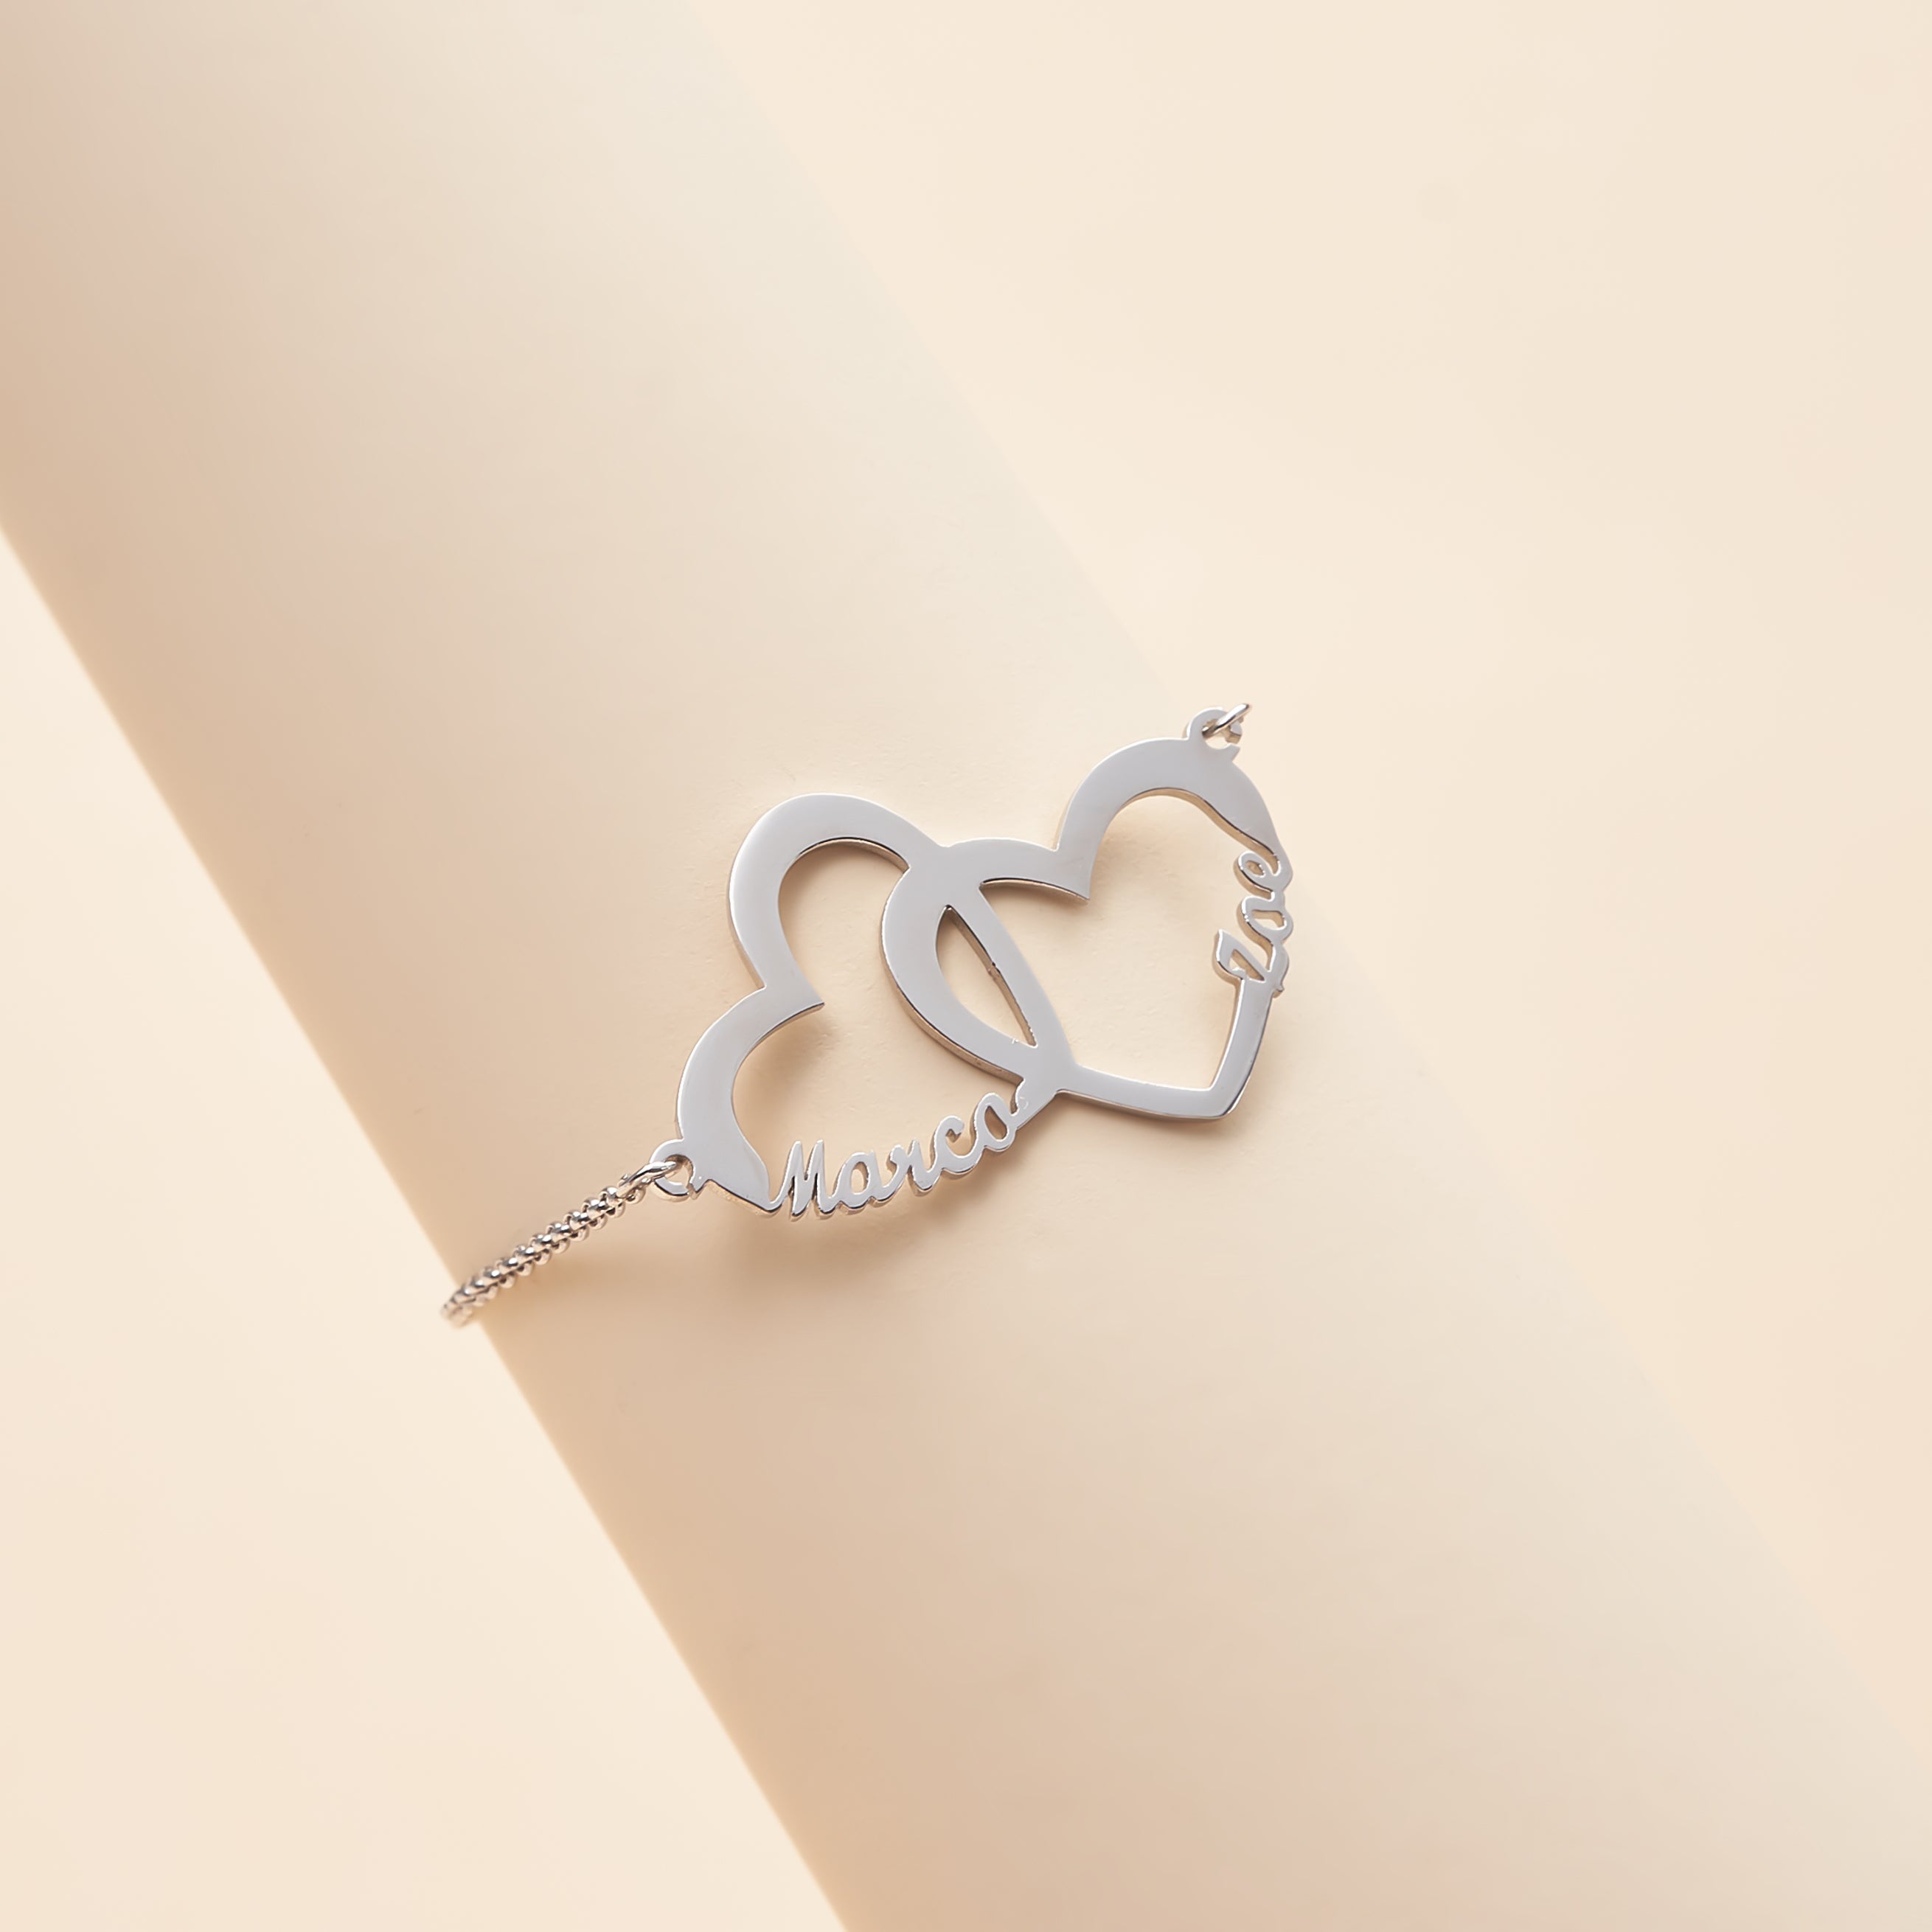 Heart-to-heart personalized name bracelet